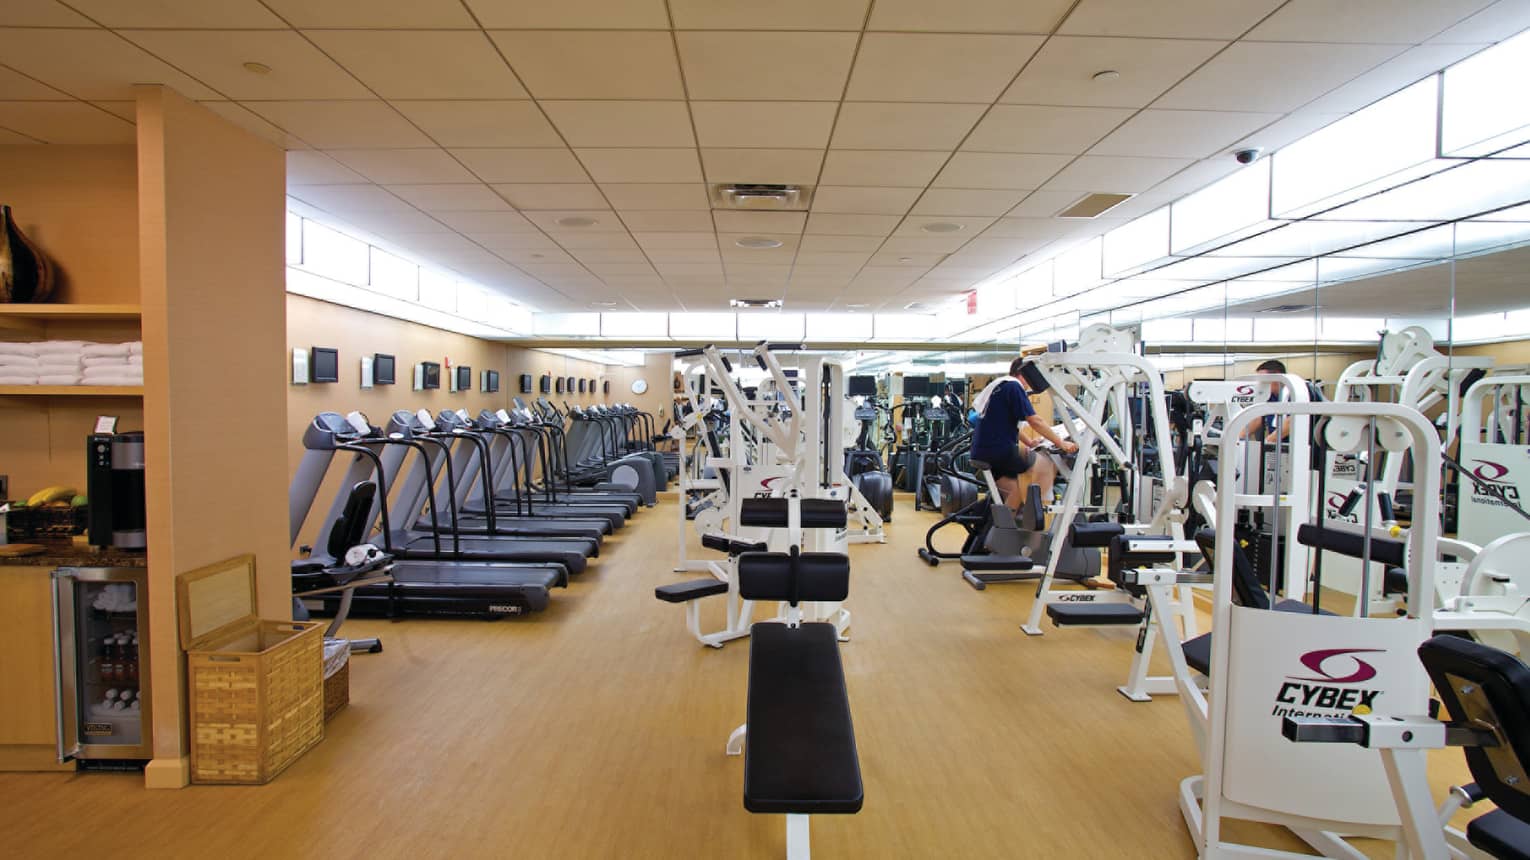 Rows of cardio machines, treadmills, bench presses in large Fitness Centre